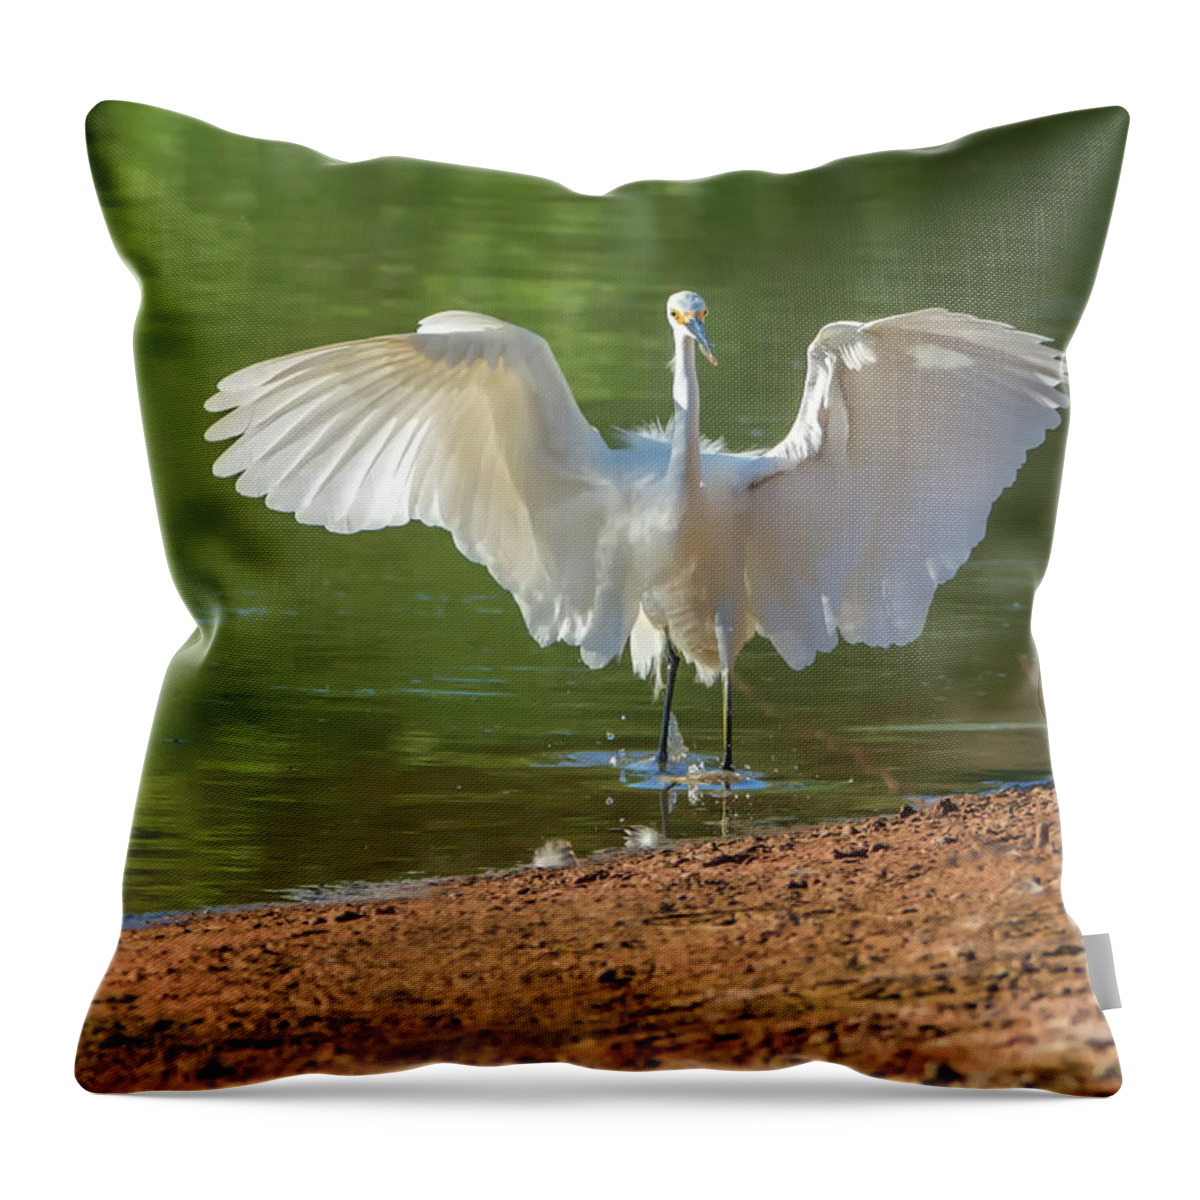 Snowy Throw Pillow featuring the photograph Snowy Egret #54 by Tam Ryan